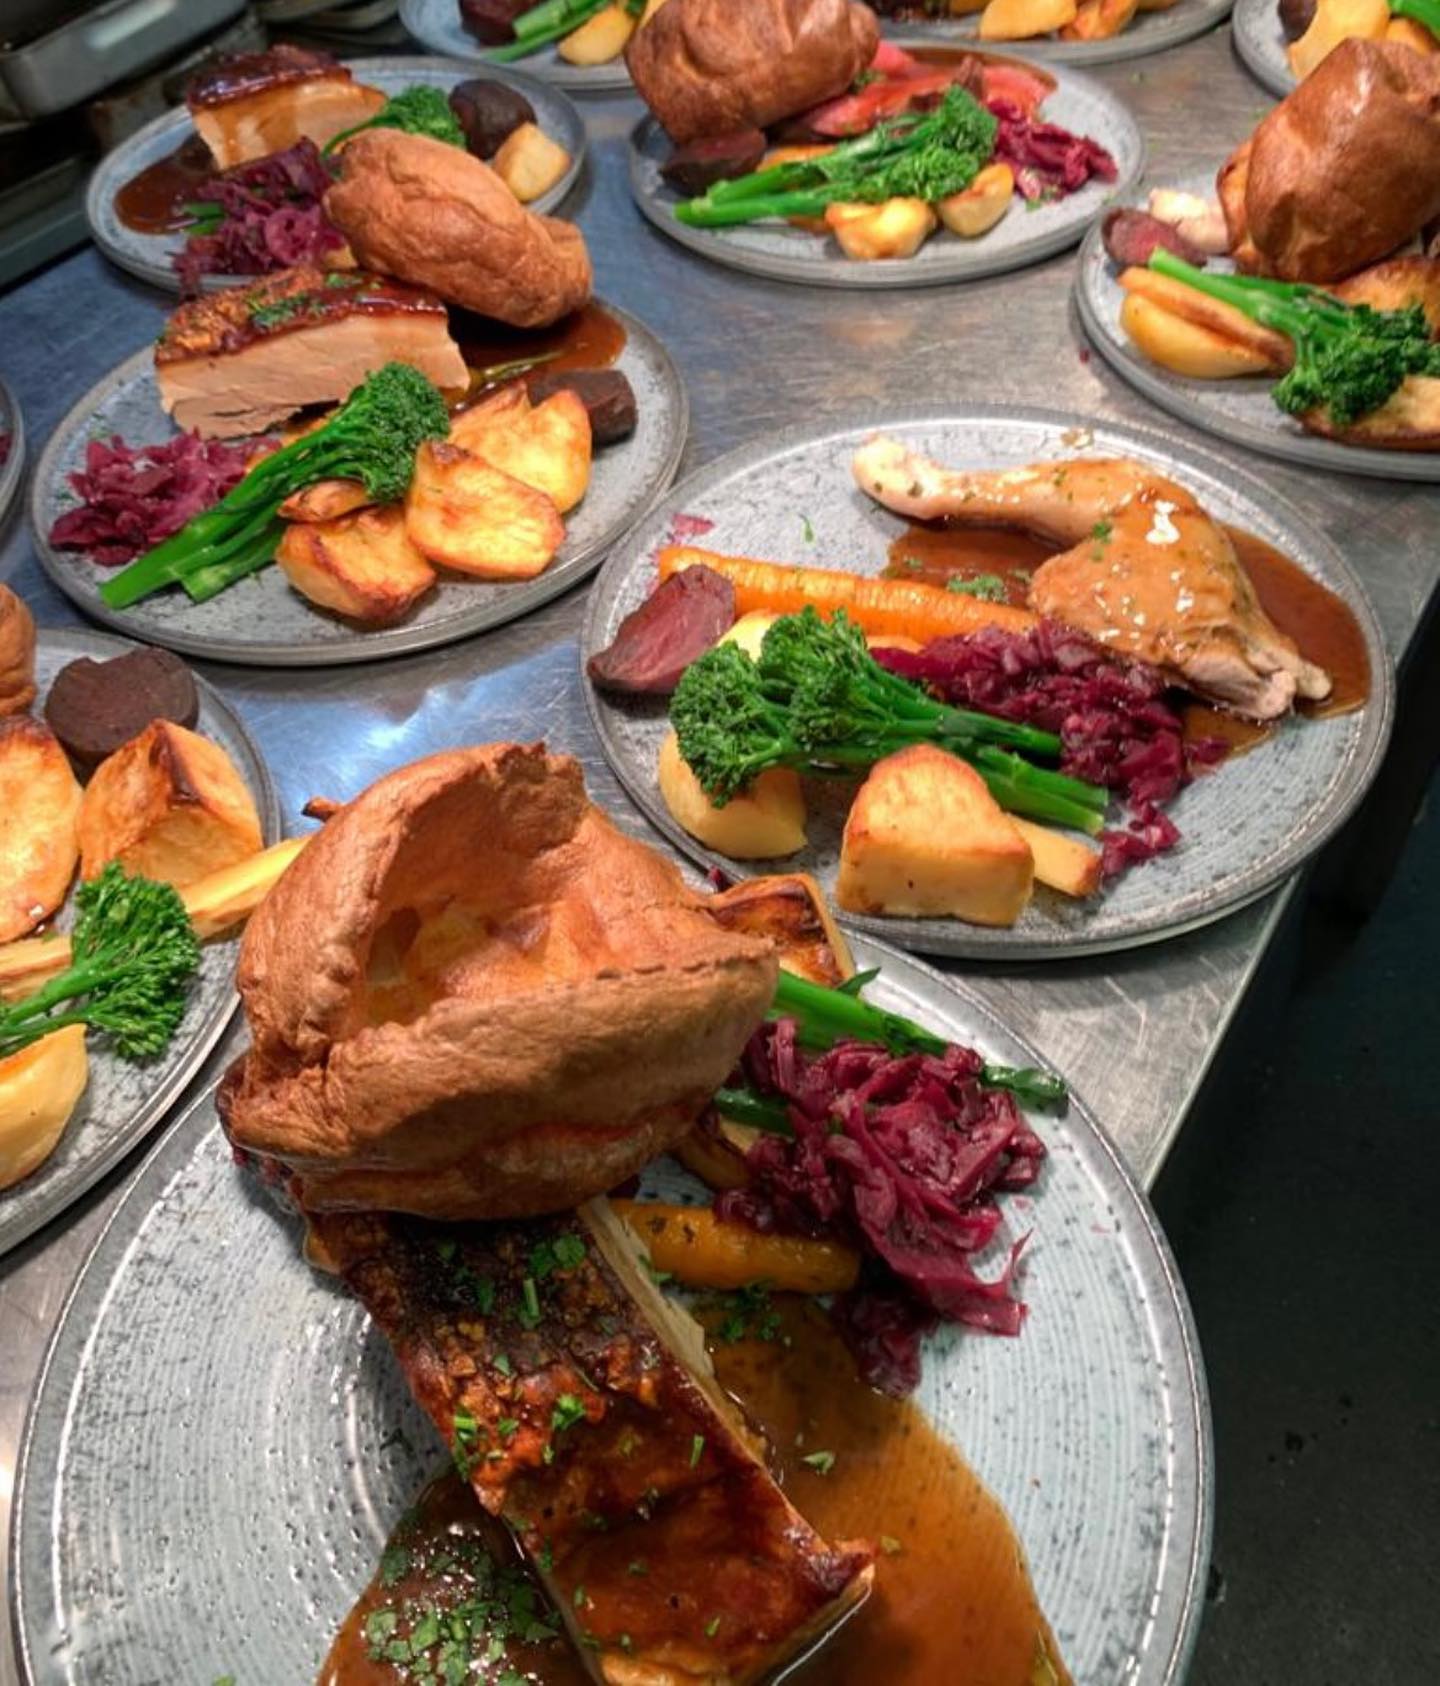 A number of plates with roast dinner on them